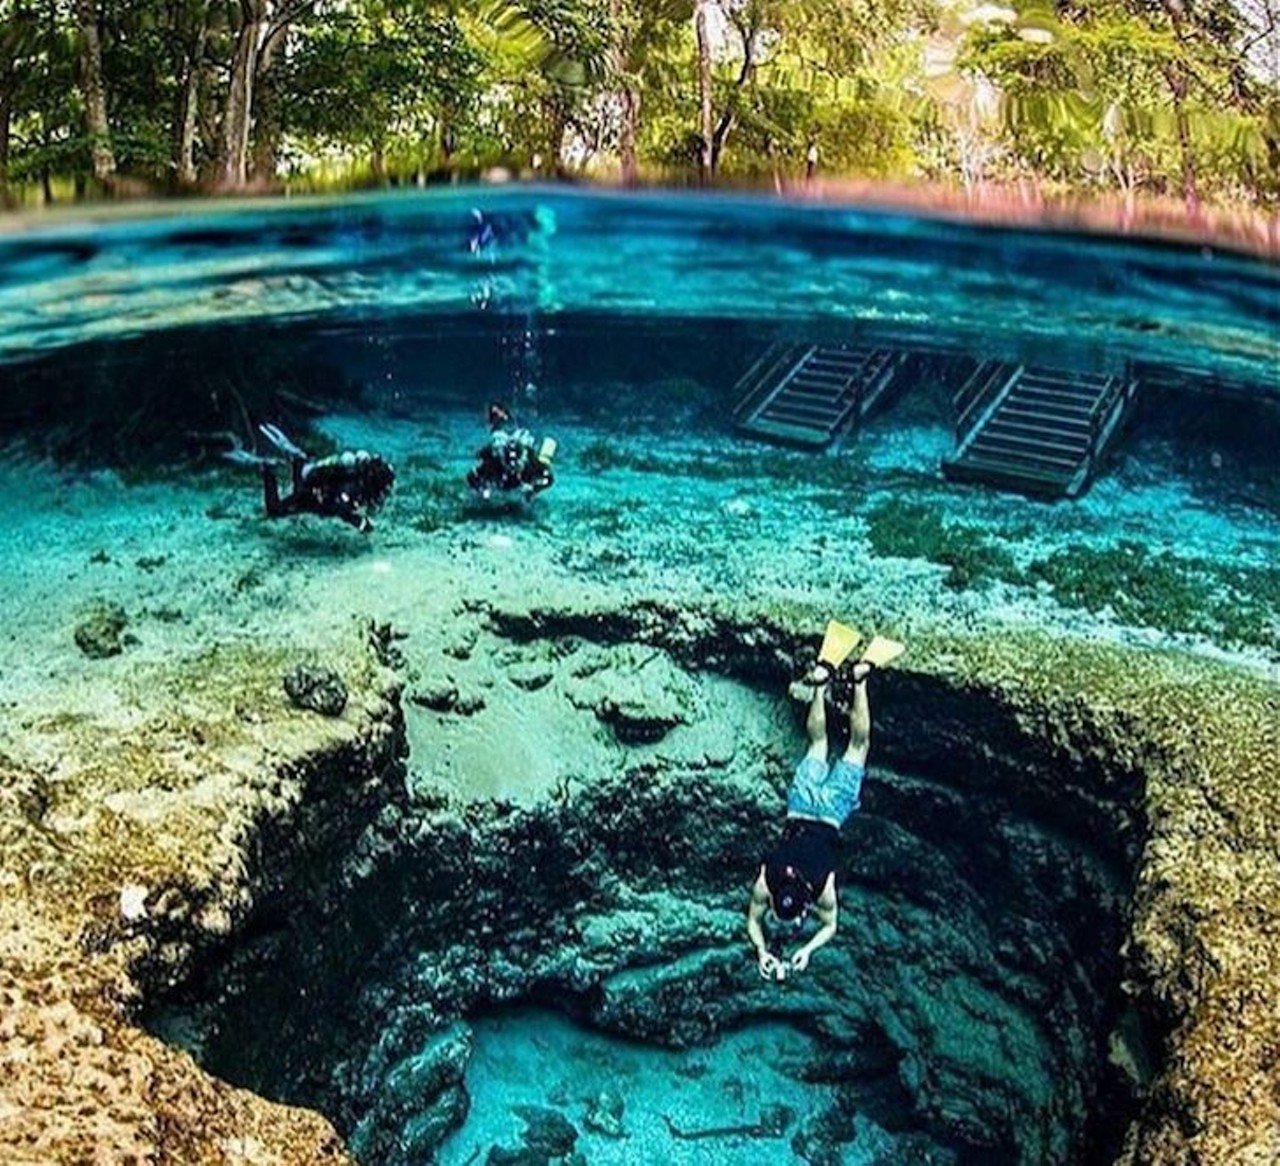 Ginnie Springs
7300 Ginnie Springs Rd, High Springs, FL 32643; 2 hours, 5 minutes from Orlando
Along with being one of Florida&#146;s most popular camping locations, Ginnie Springs has one of the clearest bodies of water in Florida. Snorkel, swim, canoe and kayak in seven different springs across the park or explore the hidden grottos beneath the water&#146;s surface. Certified divers can travel through 30,000 feet of passageways in the Devil&#146;s Springs systems, where they might catch a glimpse of a prehistoric fossil from the pleistocene era. 
Photo via theonenomad/Instagram